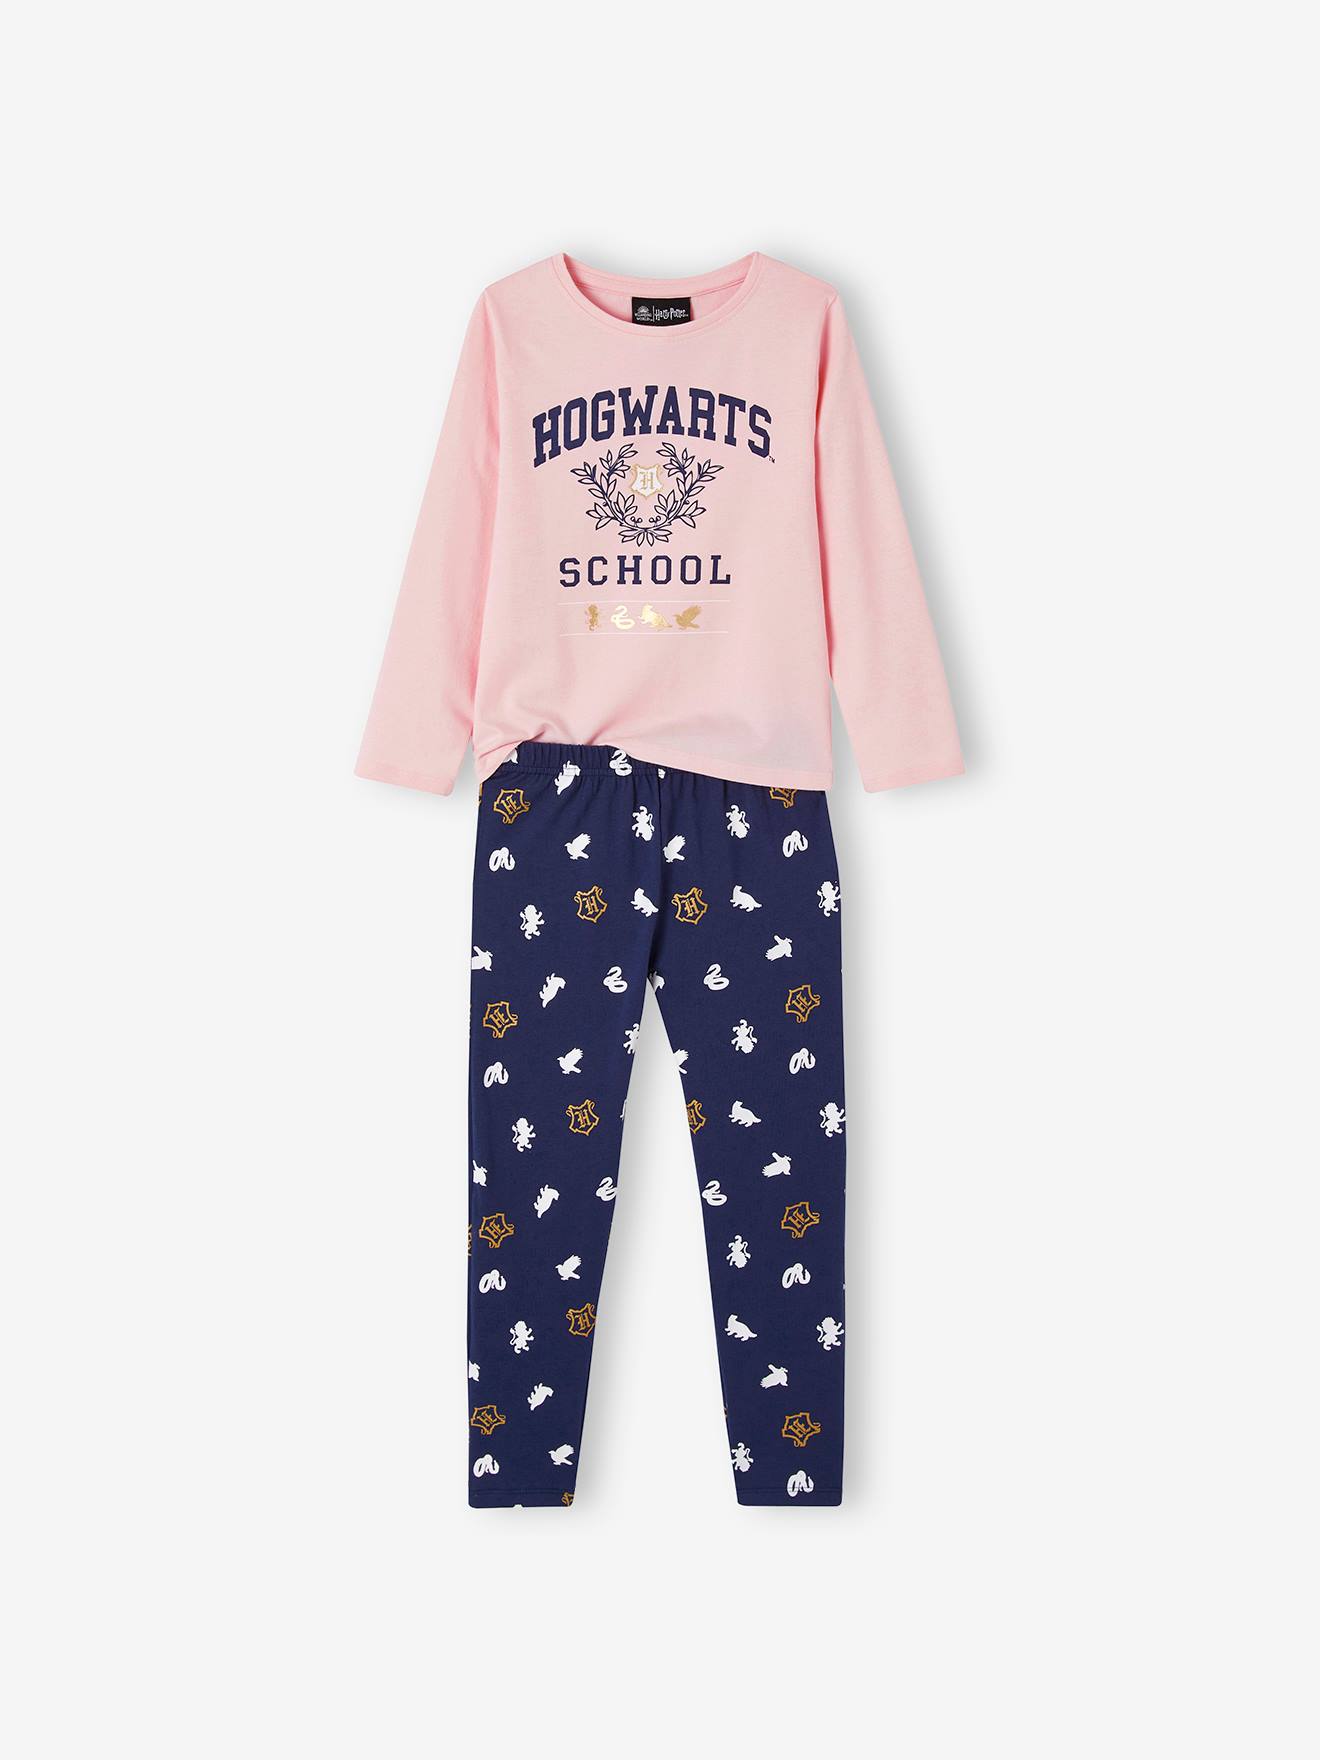 Two-Tone Harry Potter(r) Pyjamas for Girls navy blue